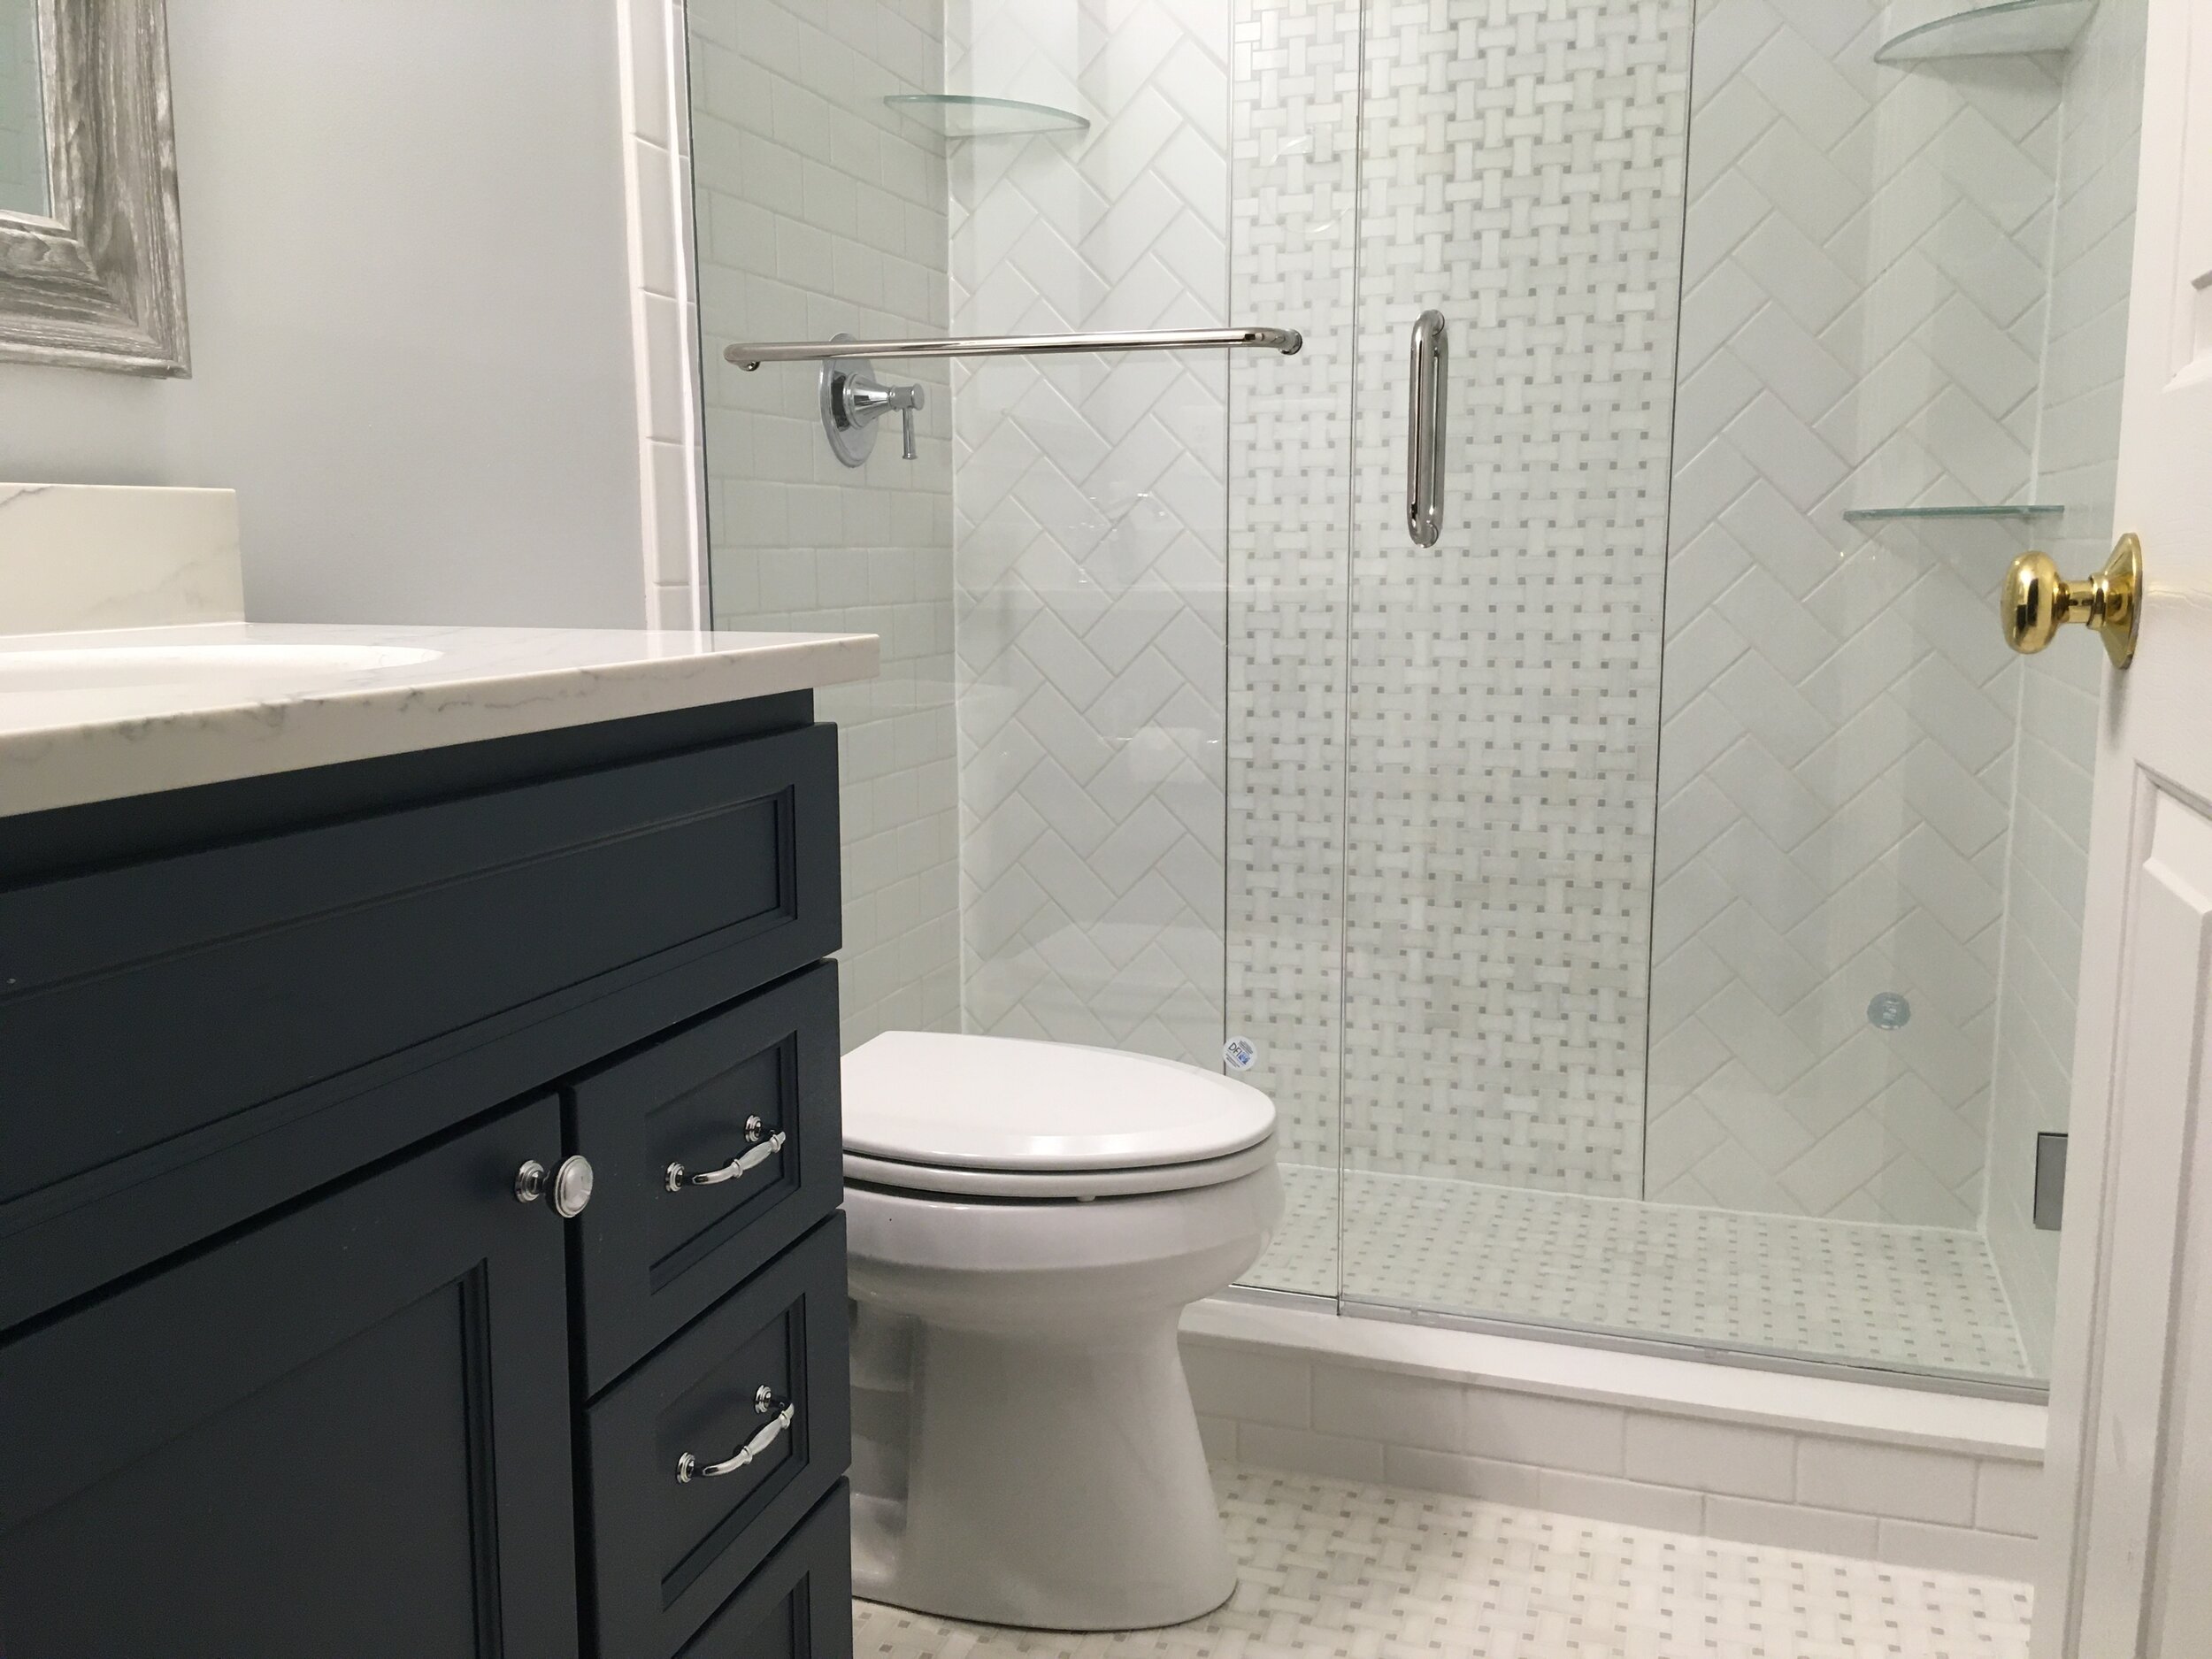  A finished bathroom with 3/8 thick glass door and fixed panel with the raincoat coating . The floor is Althea Glacier white basket weave with grey dots The same tile was used on the center of the back wall and white tile installed in herringbone des